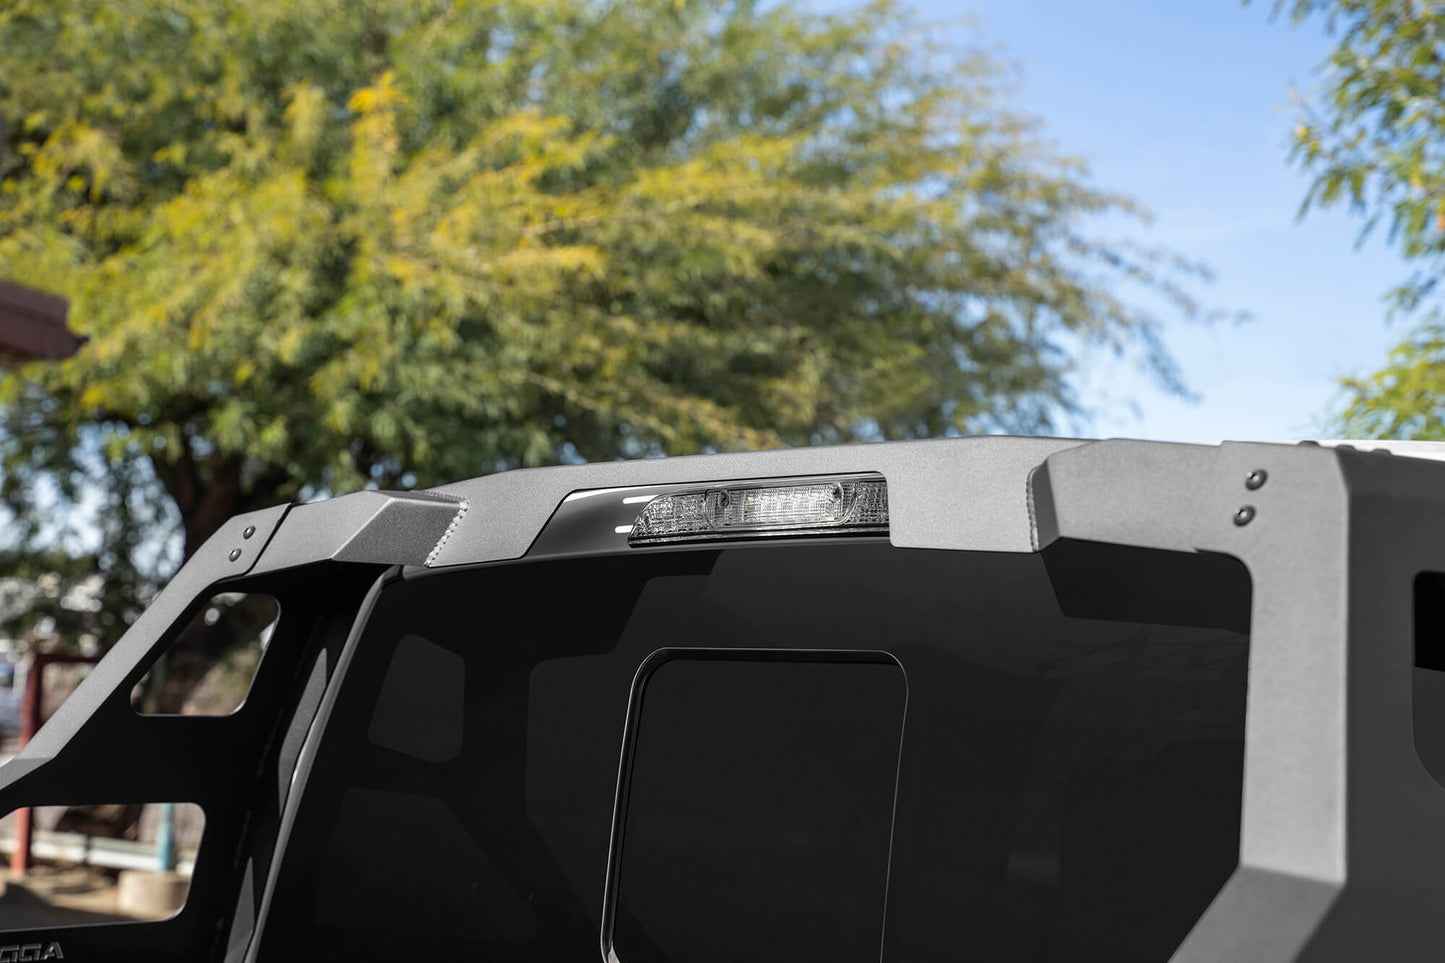 Installed on Car ADD Ford Stealth Fighter Chase Rack | Heritage | 2015-2023 F-150/Raptor